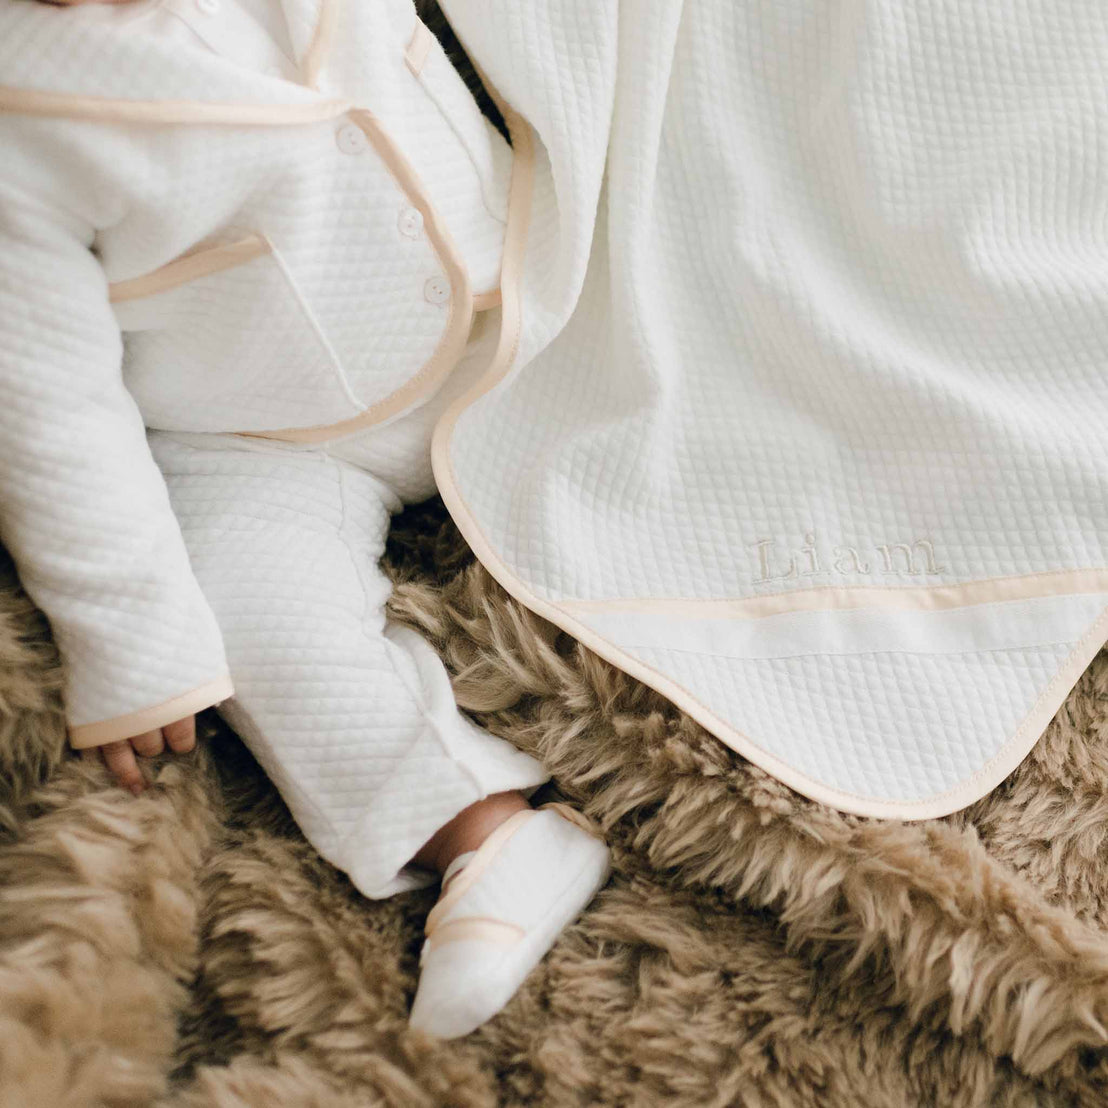 Photo of a baby sitting on a brown fur blanket. The baby is wearing the Liam 3-Piece Suit and is covered with the Liam Personalized Blanket